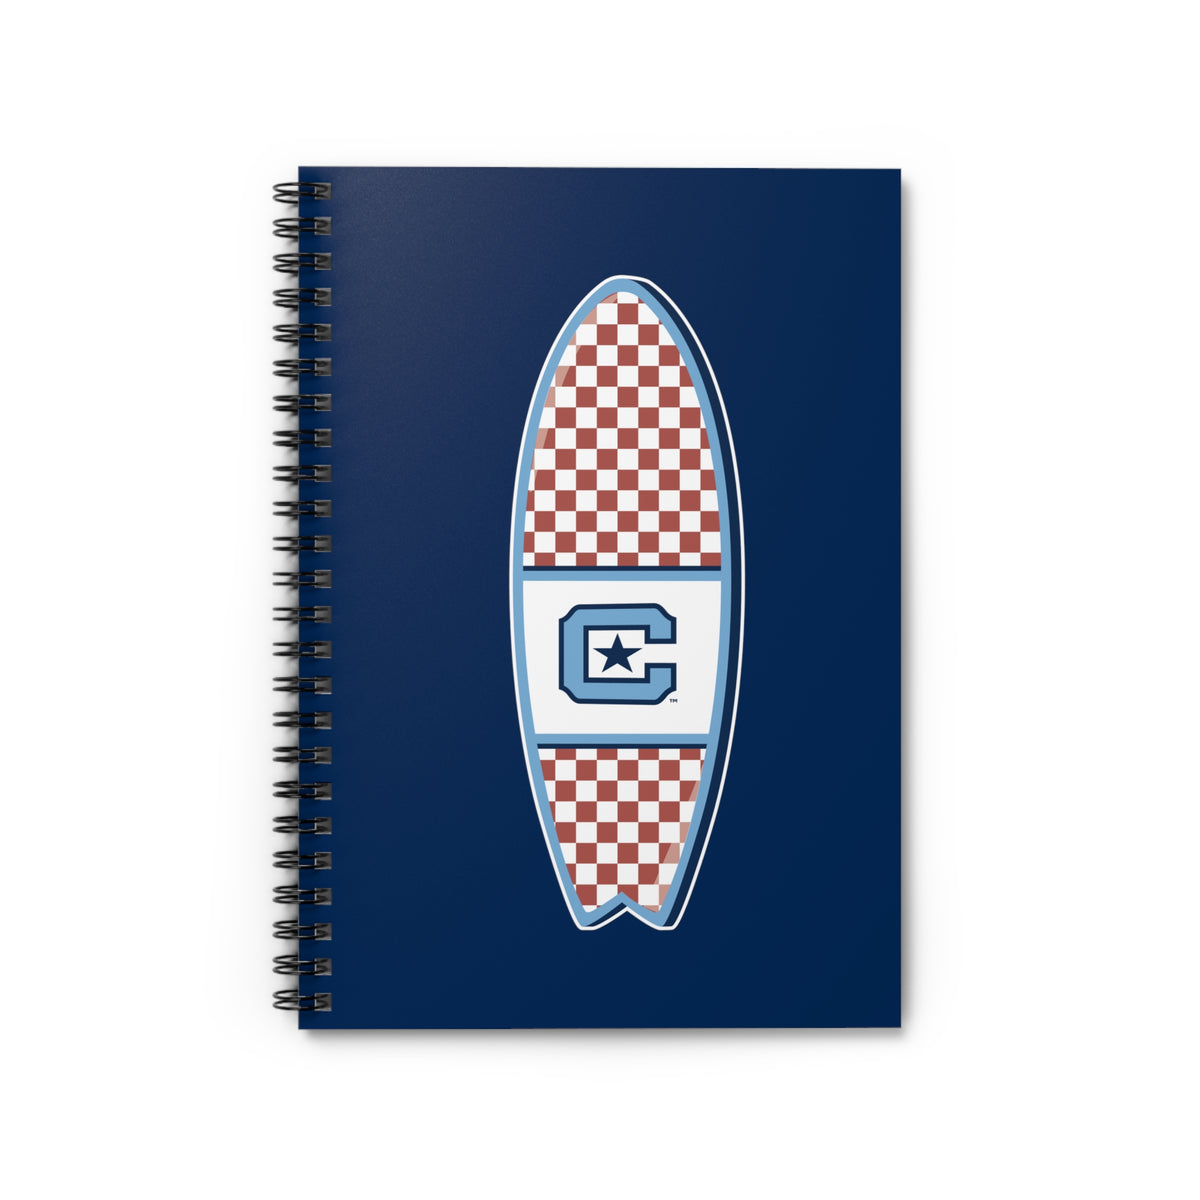 The Citadel Surfing Team, Spiral Notebook - Ruled Line